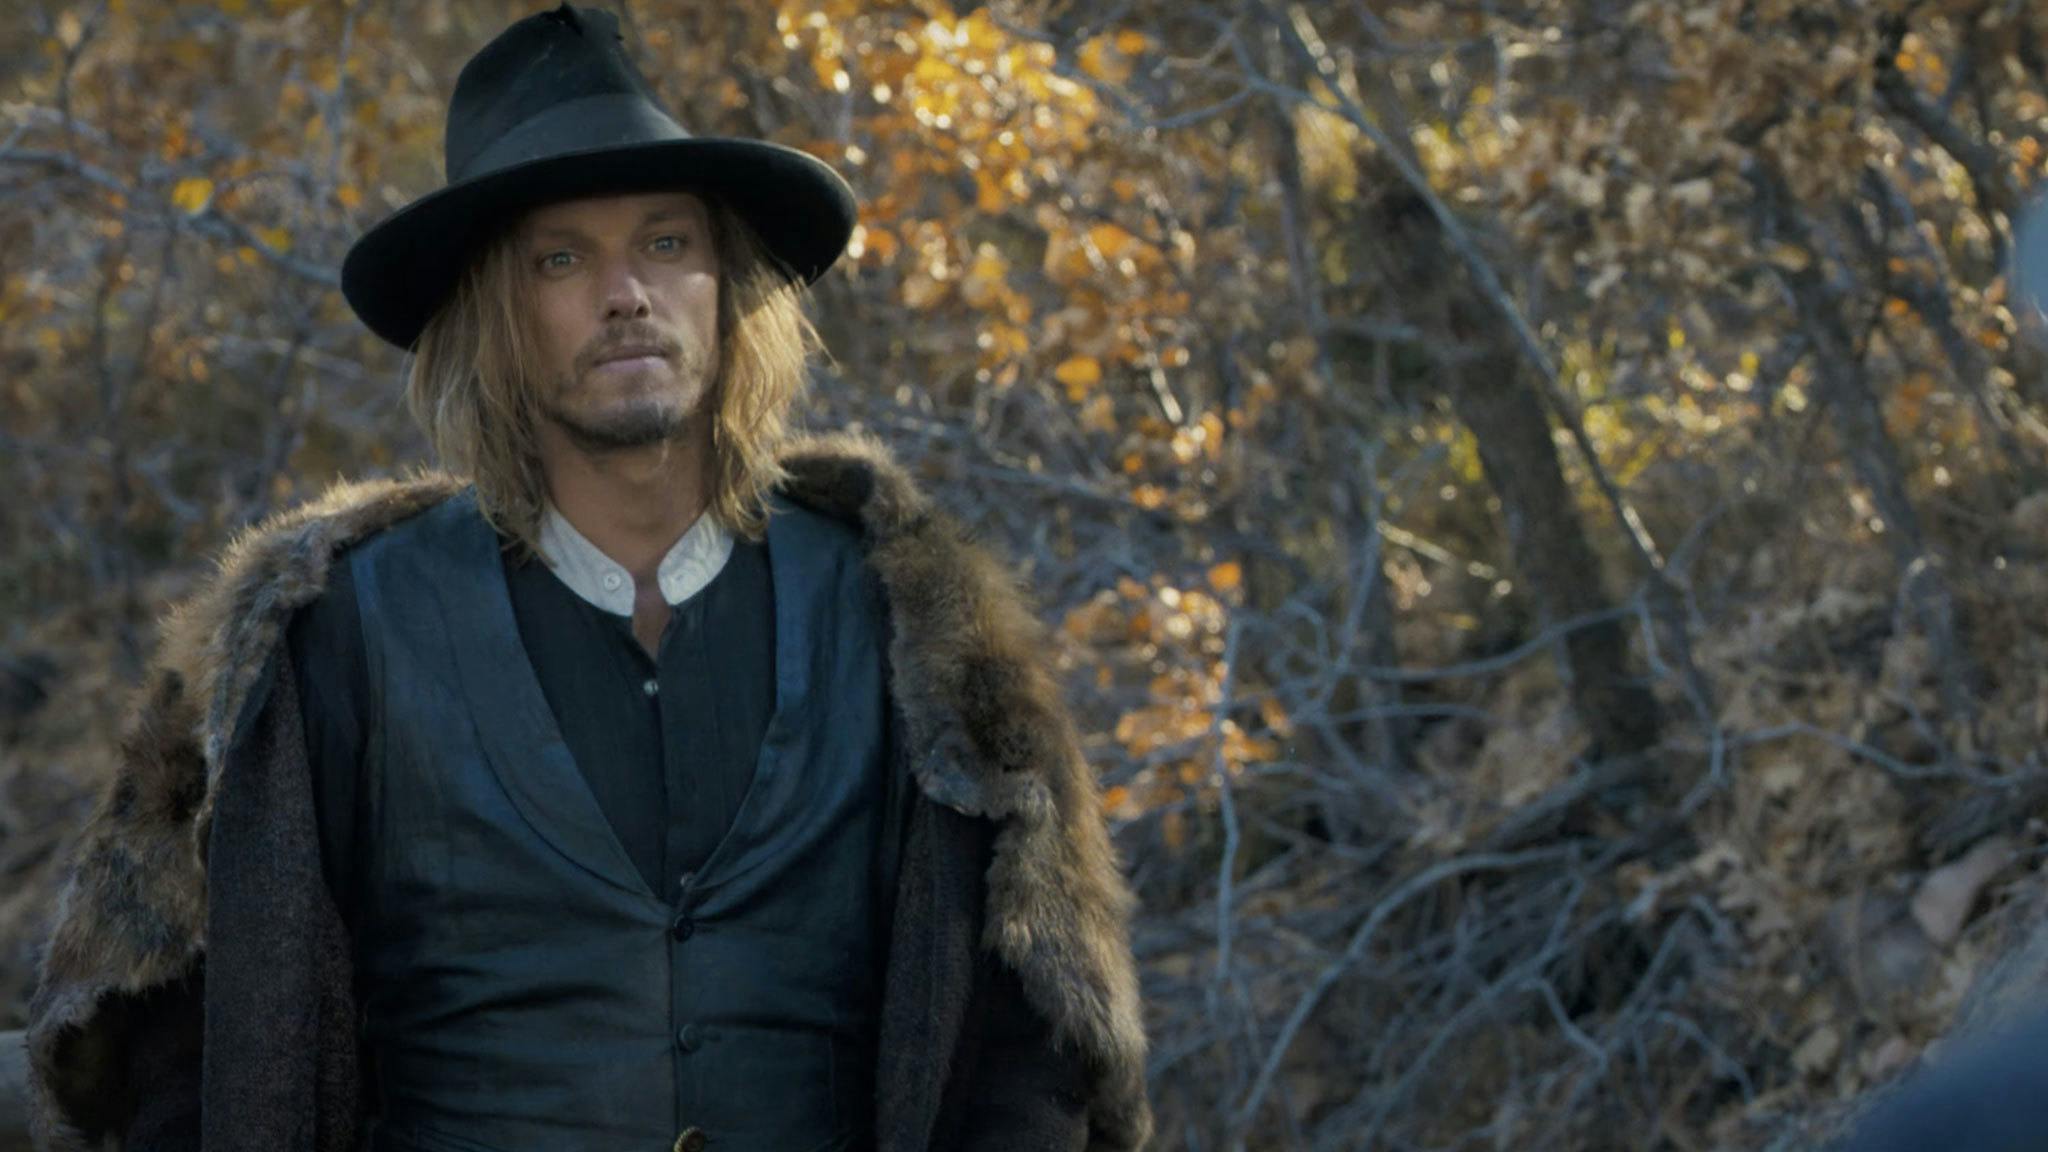 Watch the trailer for Horizon: An American Saga, starring Jamie Campbell Bower